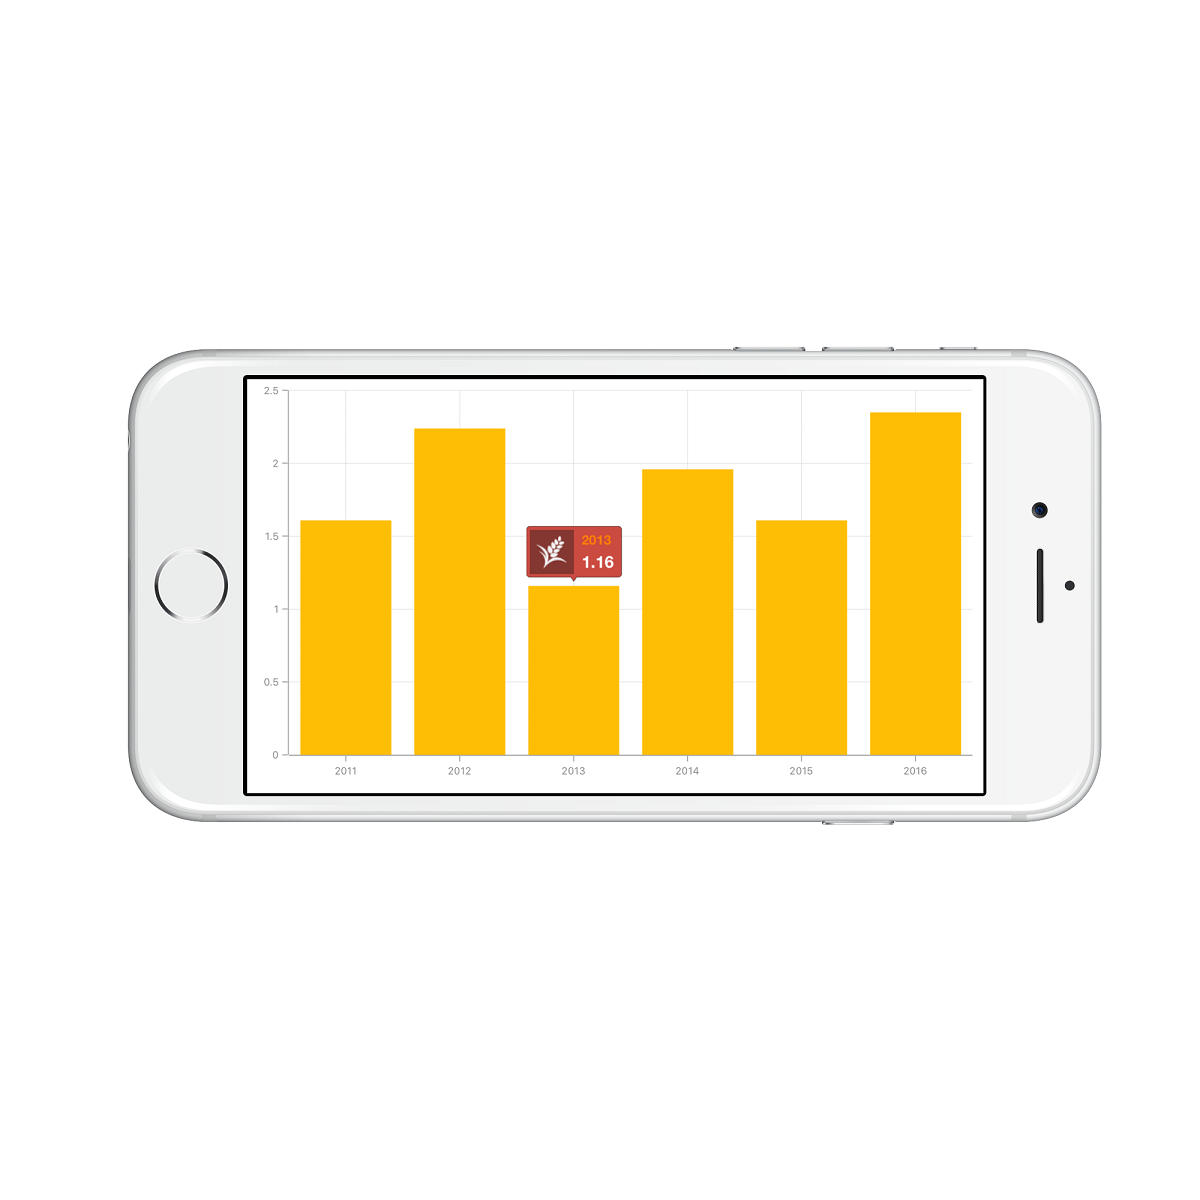 Customizing the appearance of tooltip view in Xamarin.iOS Chart